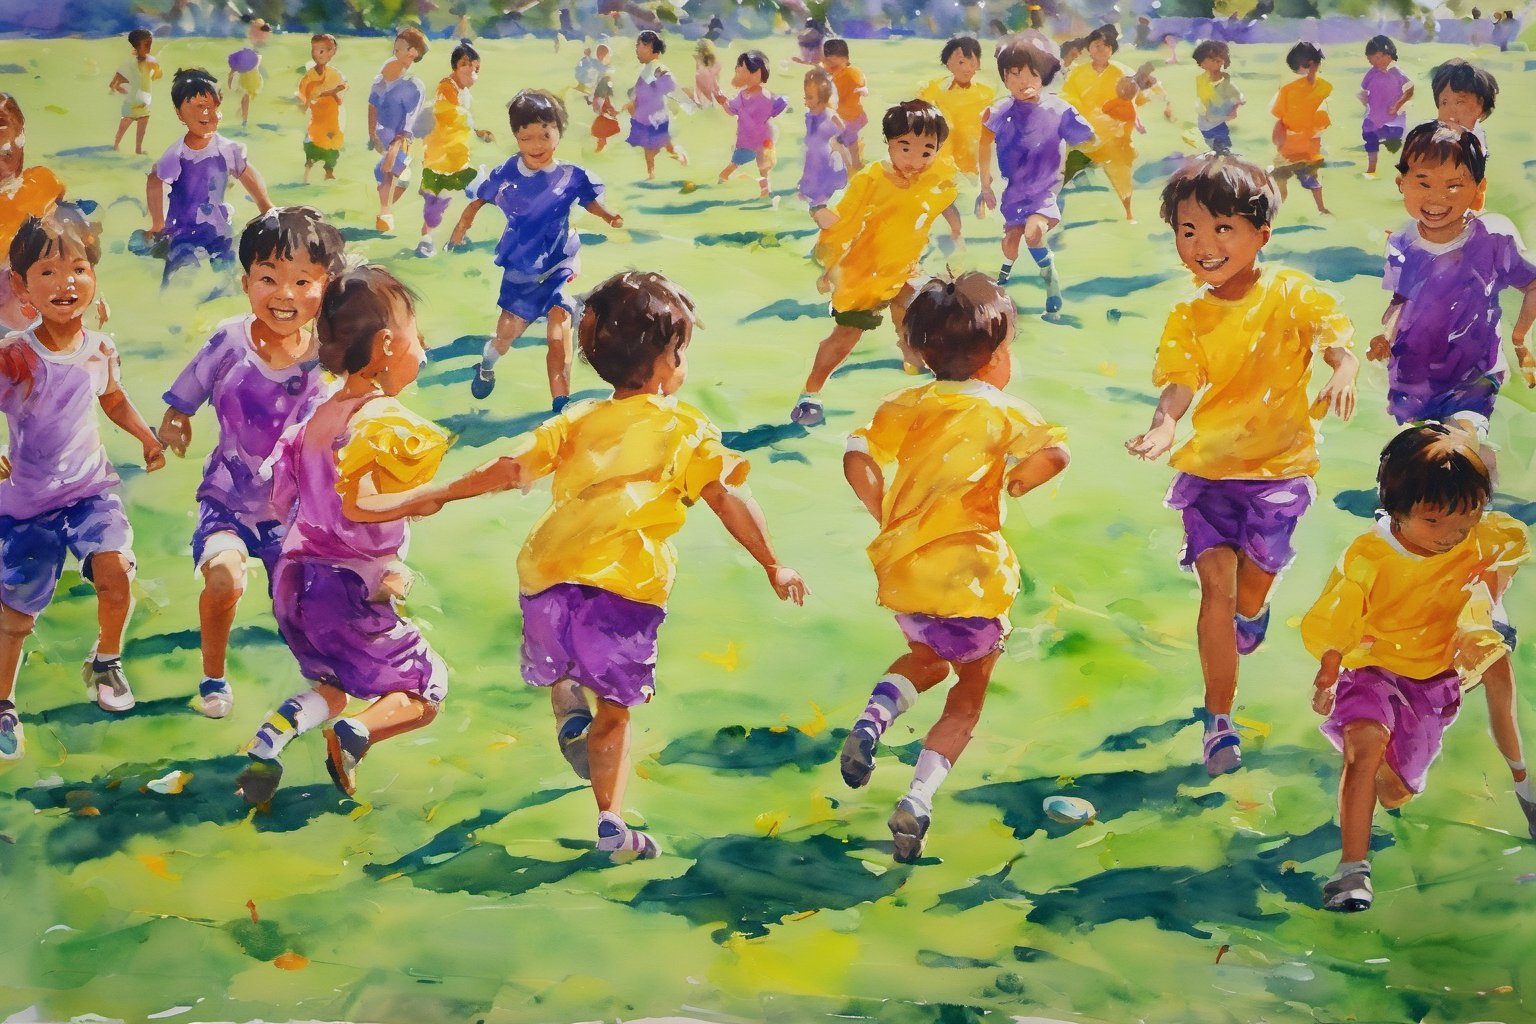 Children's painting, color painting, many children, big head, wearing yellow sports tops, purple sports shorts, playing football on the turf, sunshine